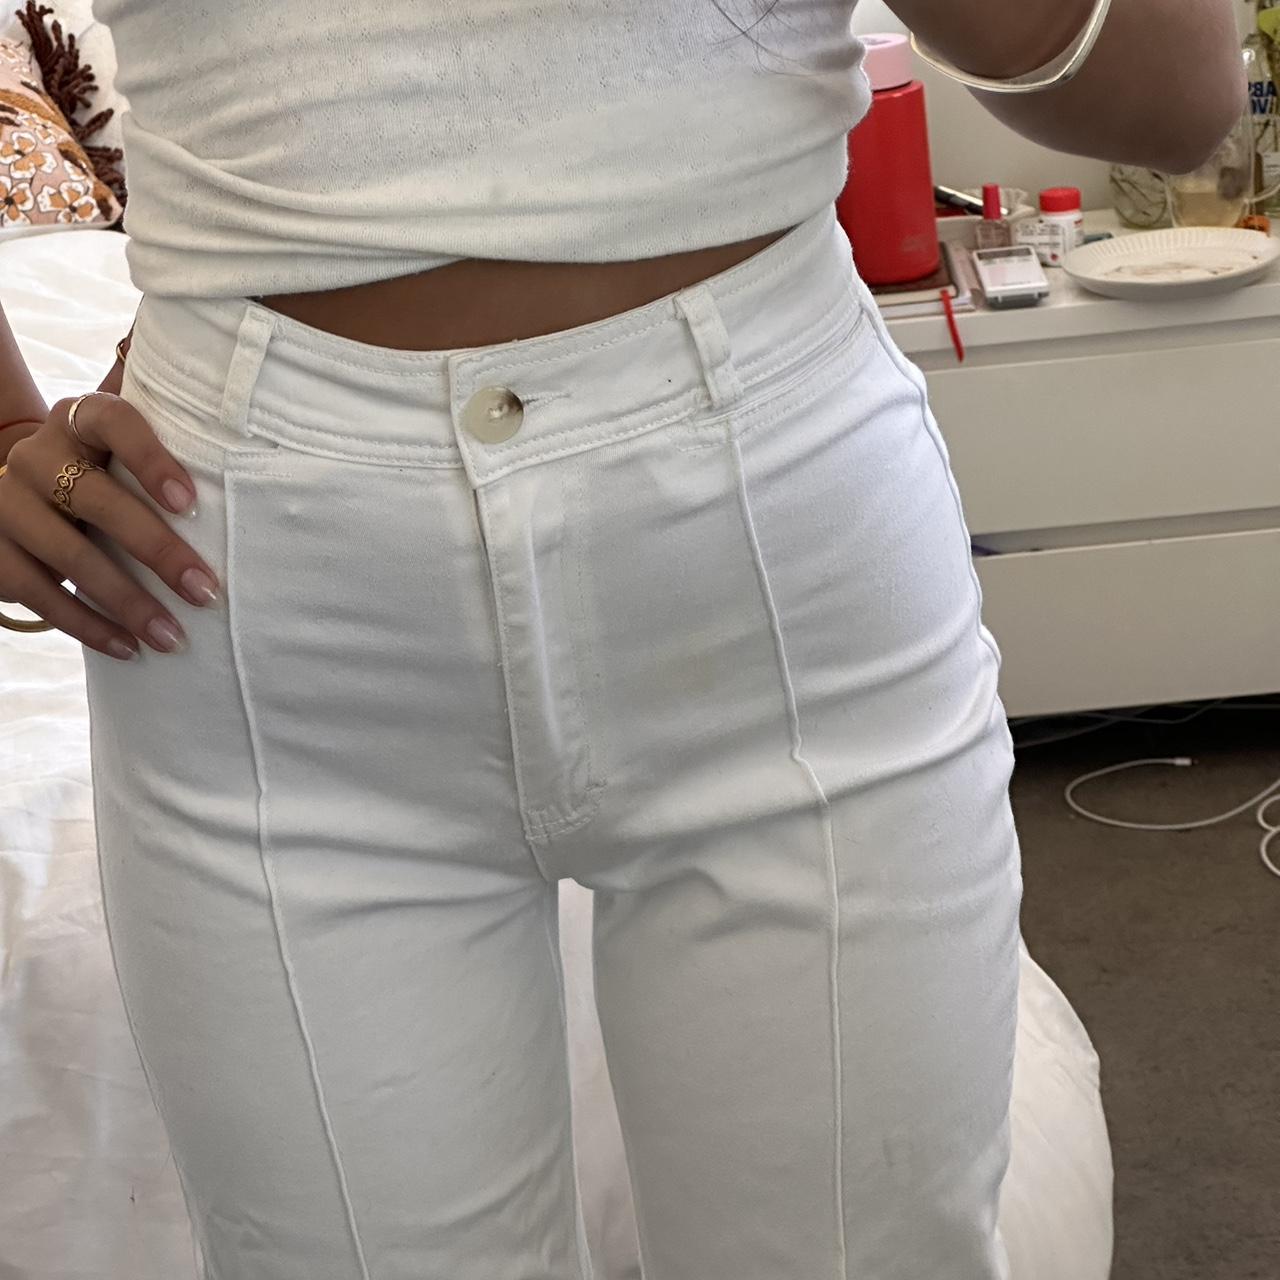 white high rise glassons dress pants well loved but... - Depop